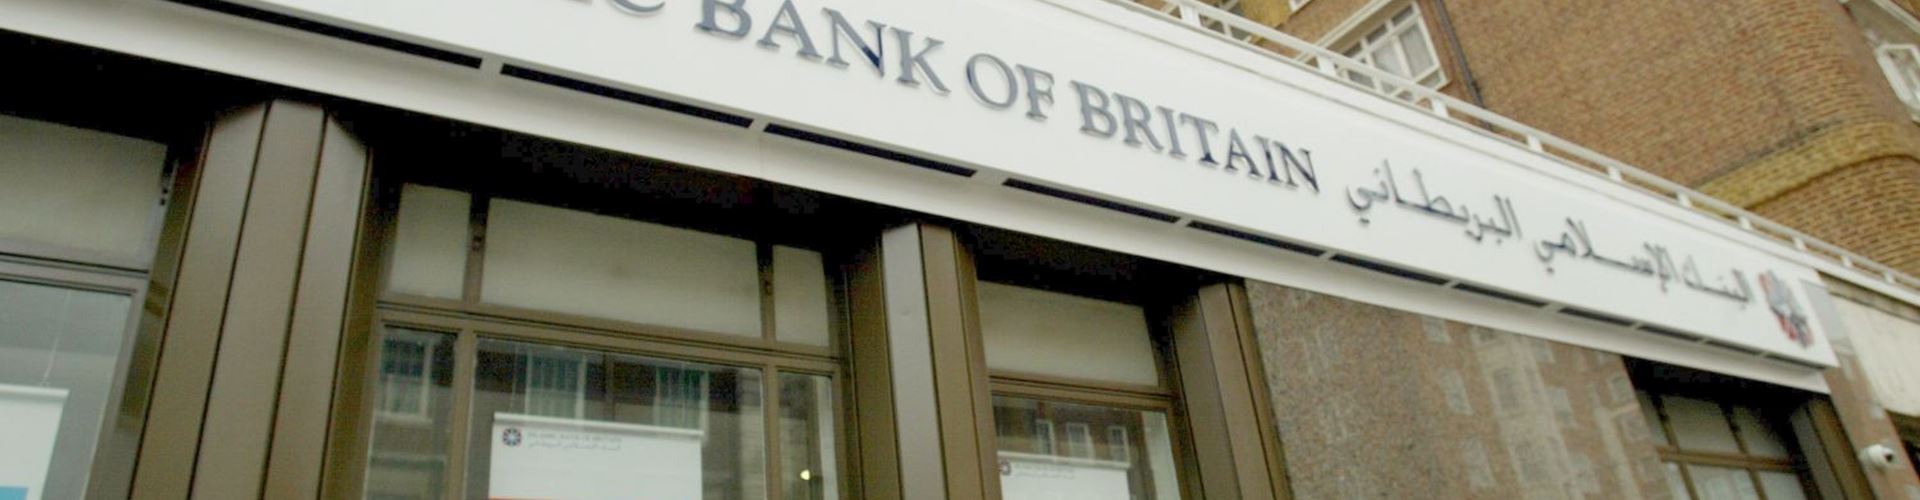 50,000 customer strong Islamic Bank of Britain seeks to expand its business